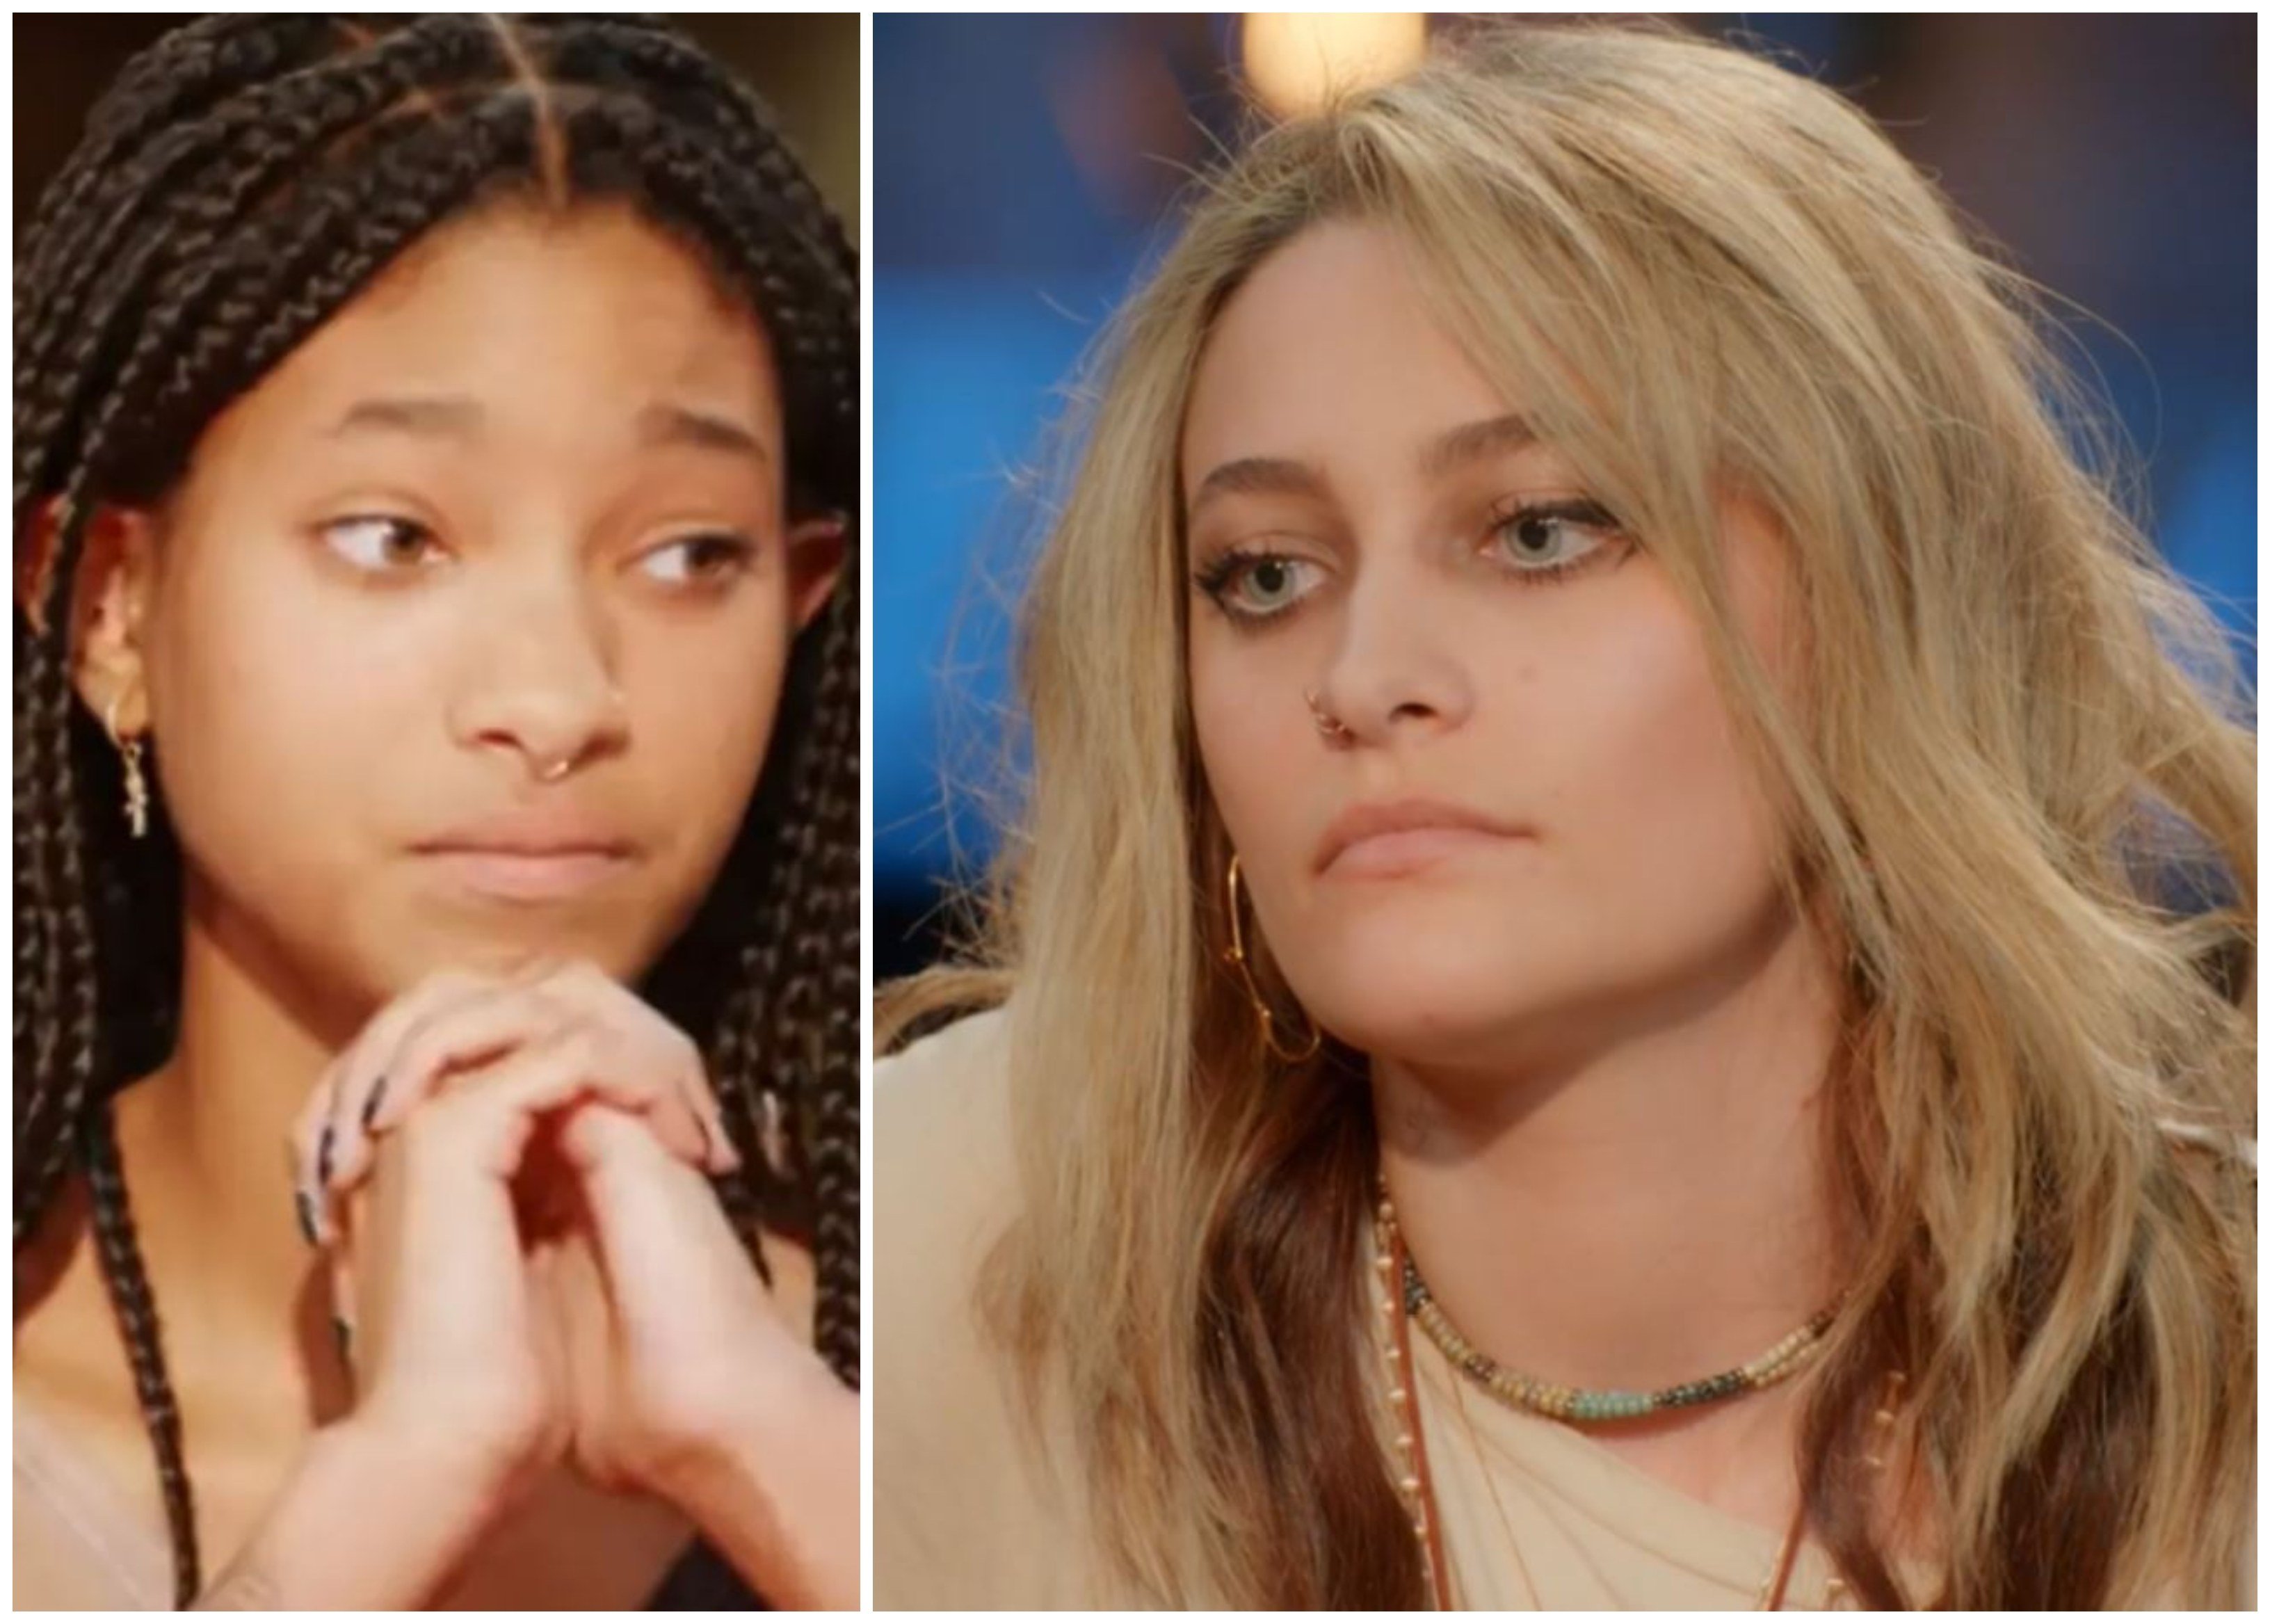 Paris Jackson opened up to Willow Smith on Red Table Talk. Photo: Facebook Watch